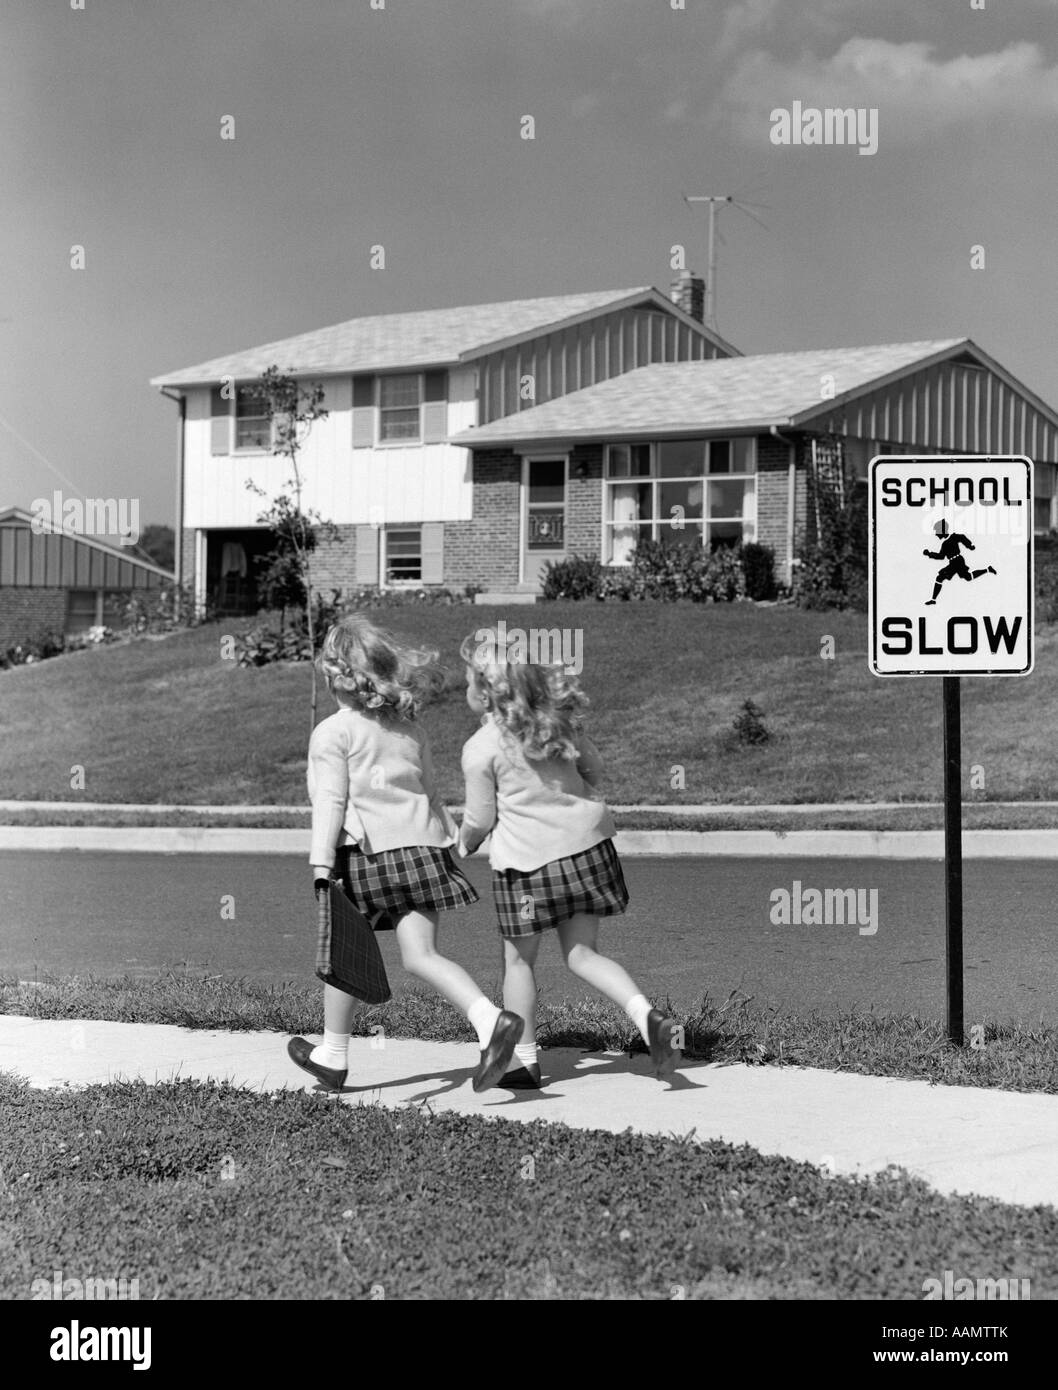 1950s 3 4 BACK VIEW OF TWIN GIRLS IN PLAID SKIRTS & CARDIGANS HOLDING BOOK BAGS RUNNING PAST SCHOOL SLOW SIGN Stock Photo